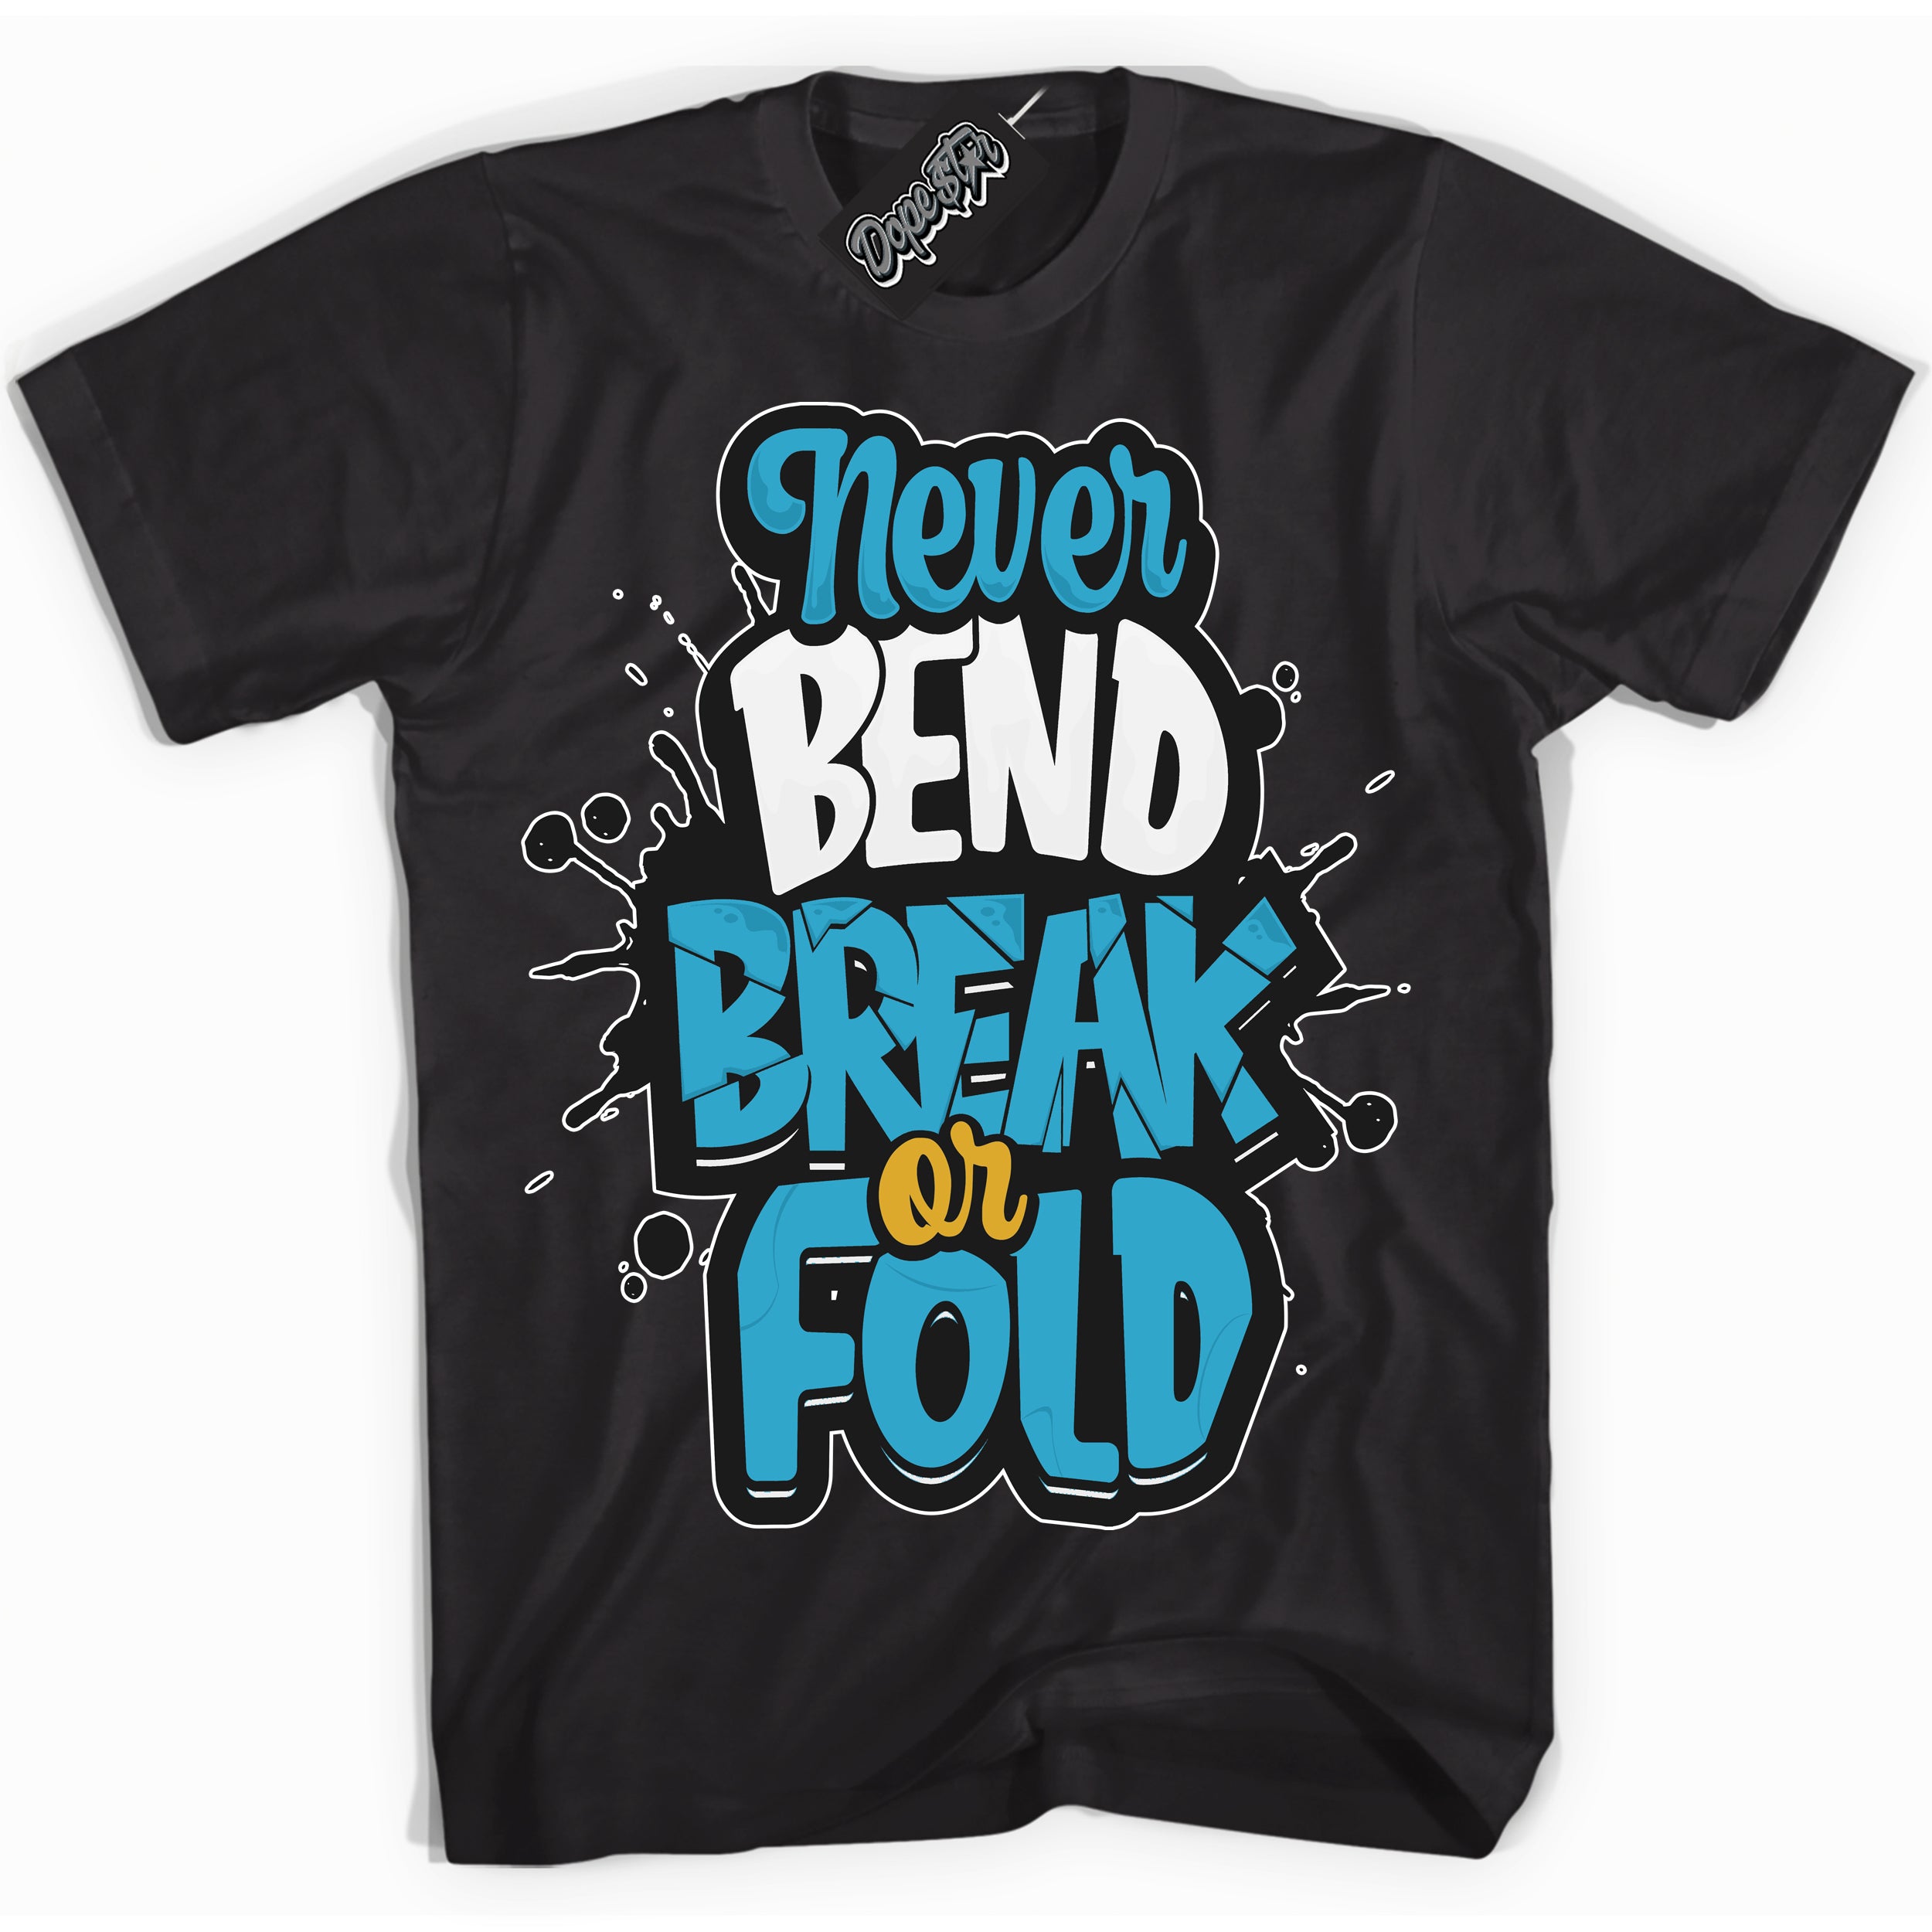 Cool Black Shirt with “ Never Bend Break Or Fold” design that perfectly matches Aqua 5s Sneakers.